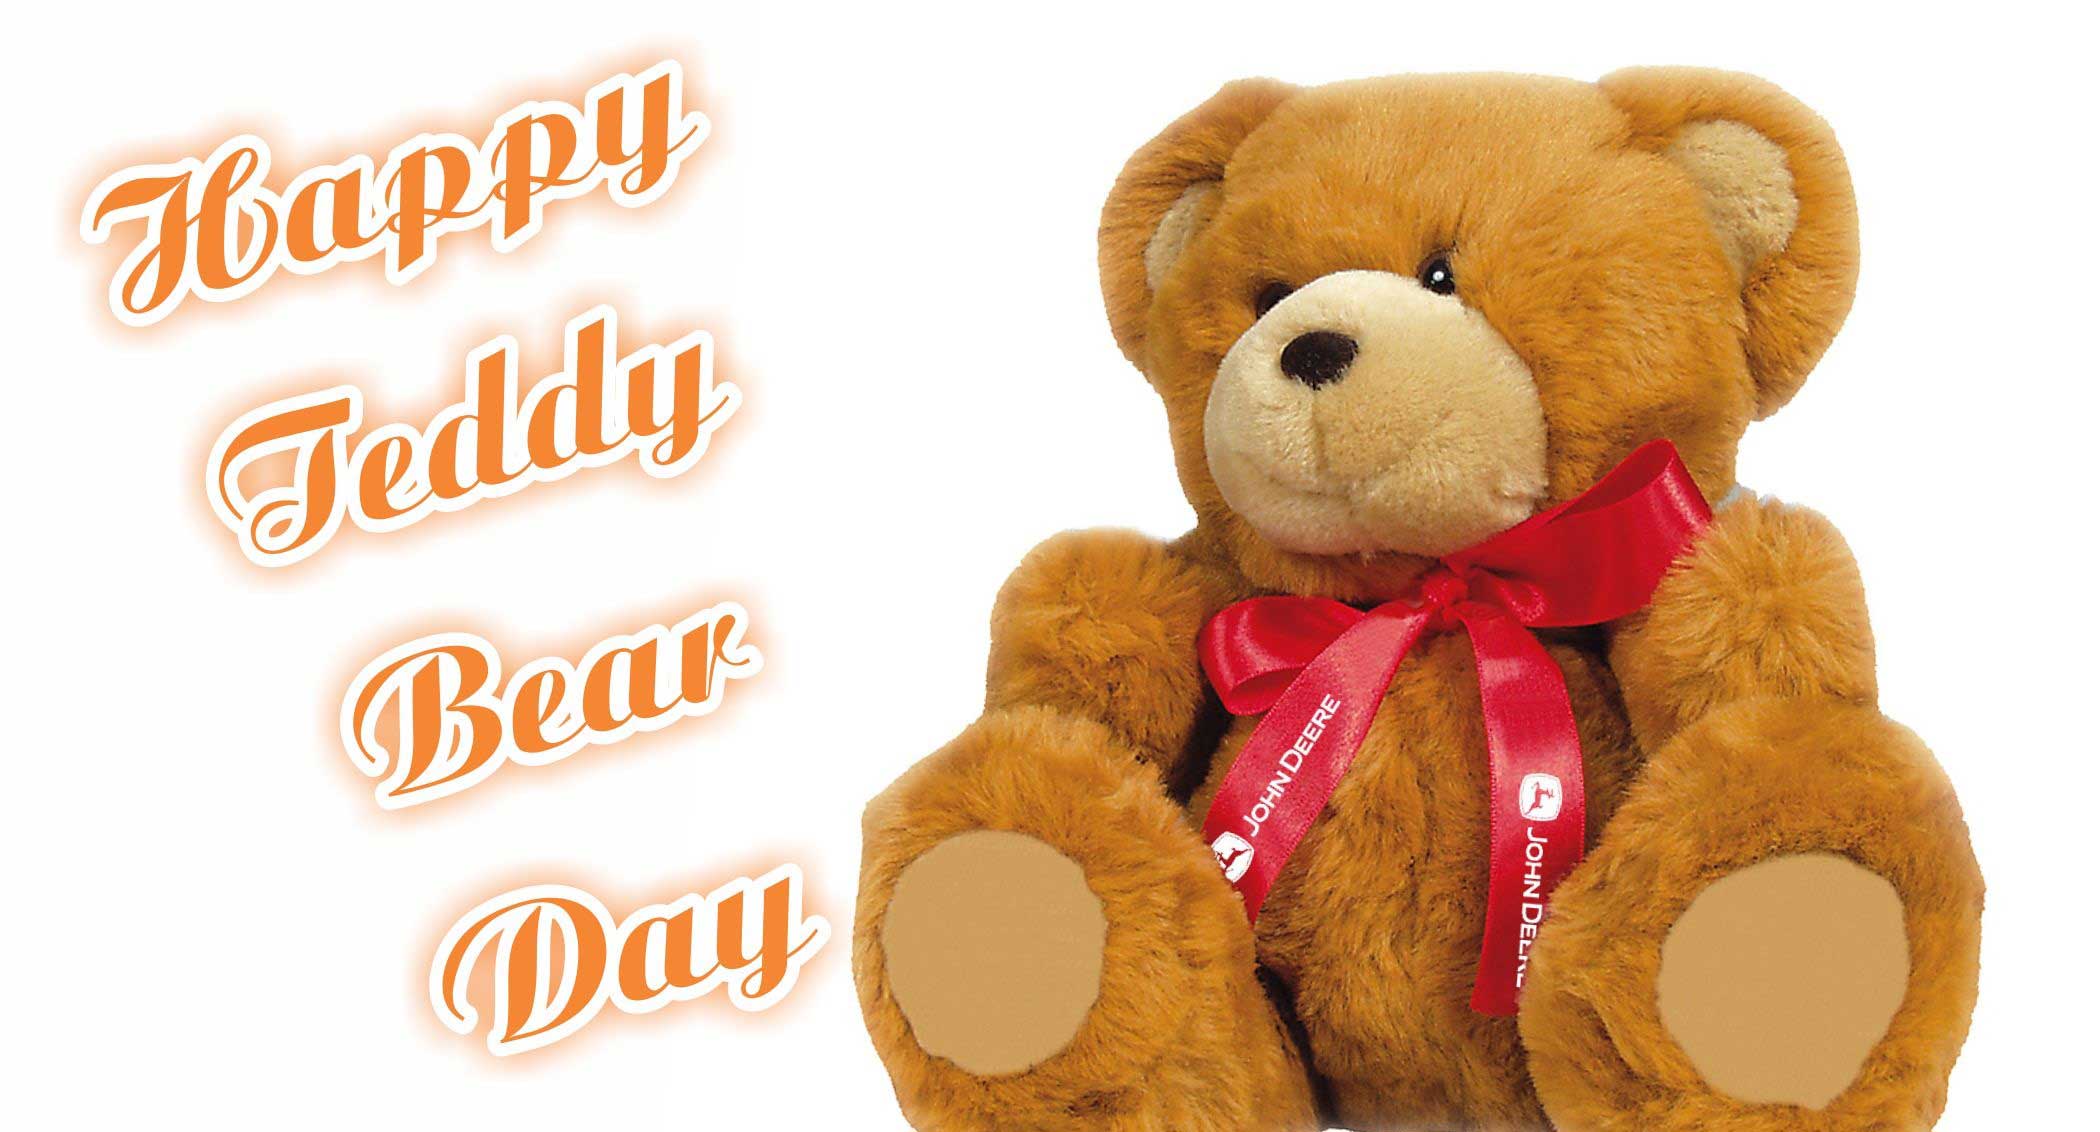 happy-Teddy-Bear-Day-Teddy-Day-2015-HD-Images-With-Quotes-Download-Wallpapers-Pics-Pictures-Photos